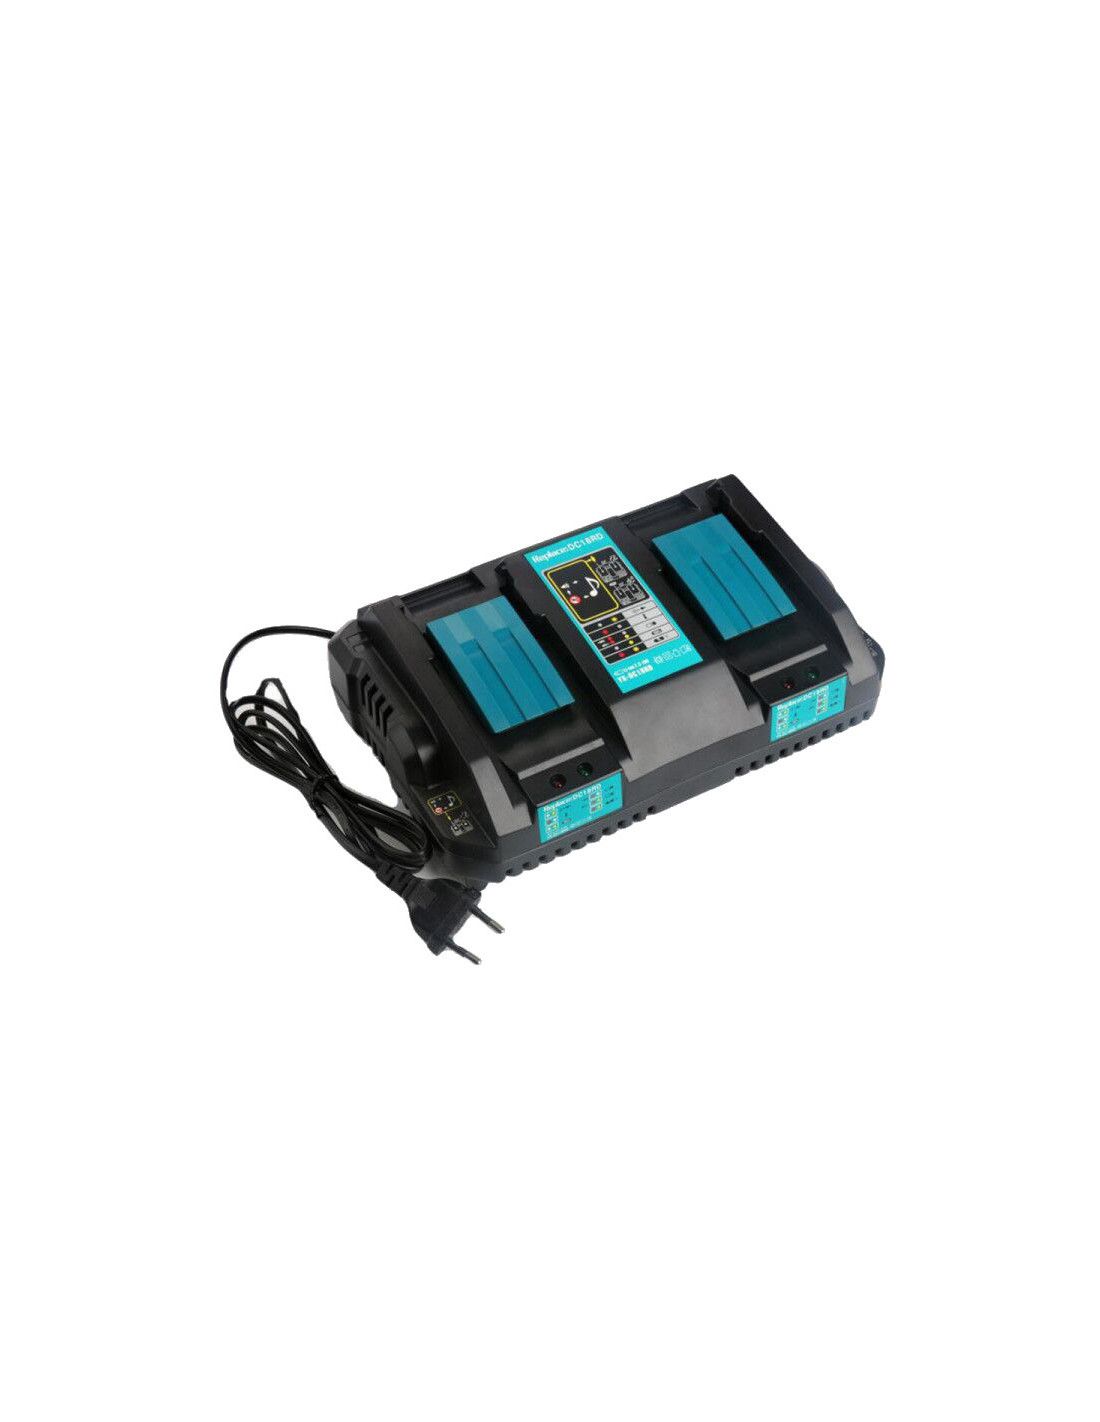 Makita chargeur rapide double DC18RD